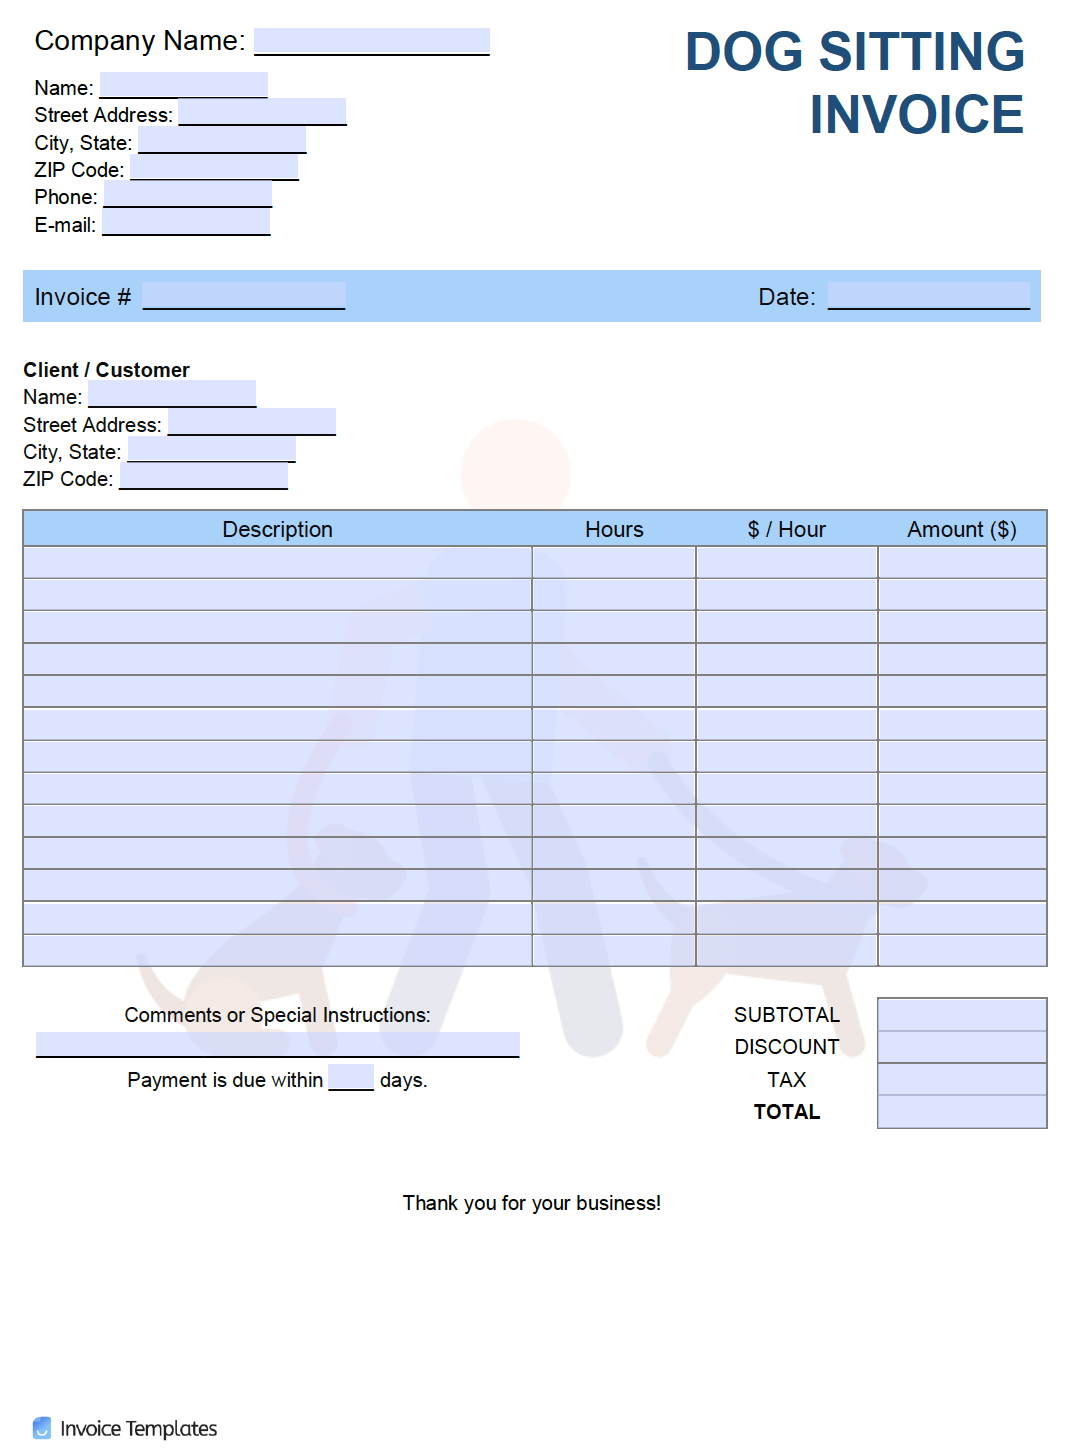 Dog Sitting Invoice Template